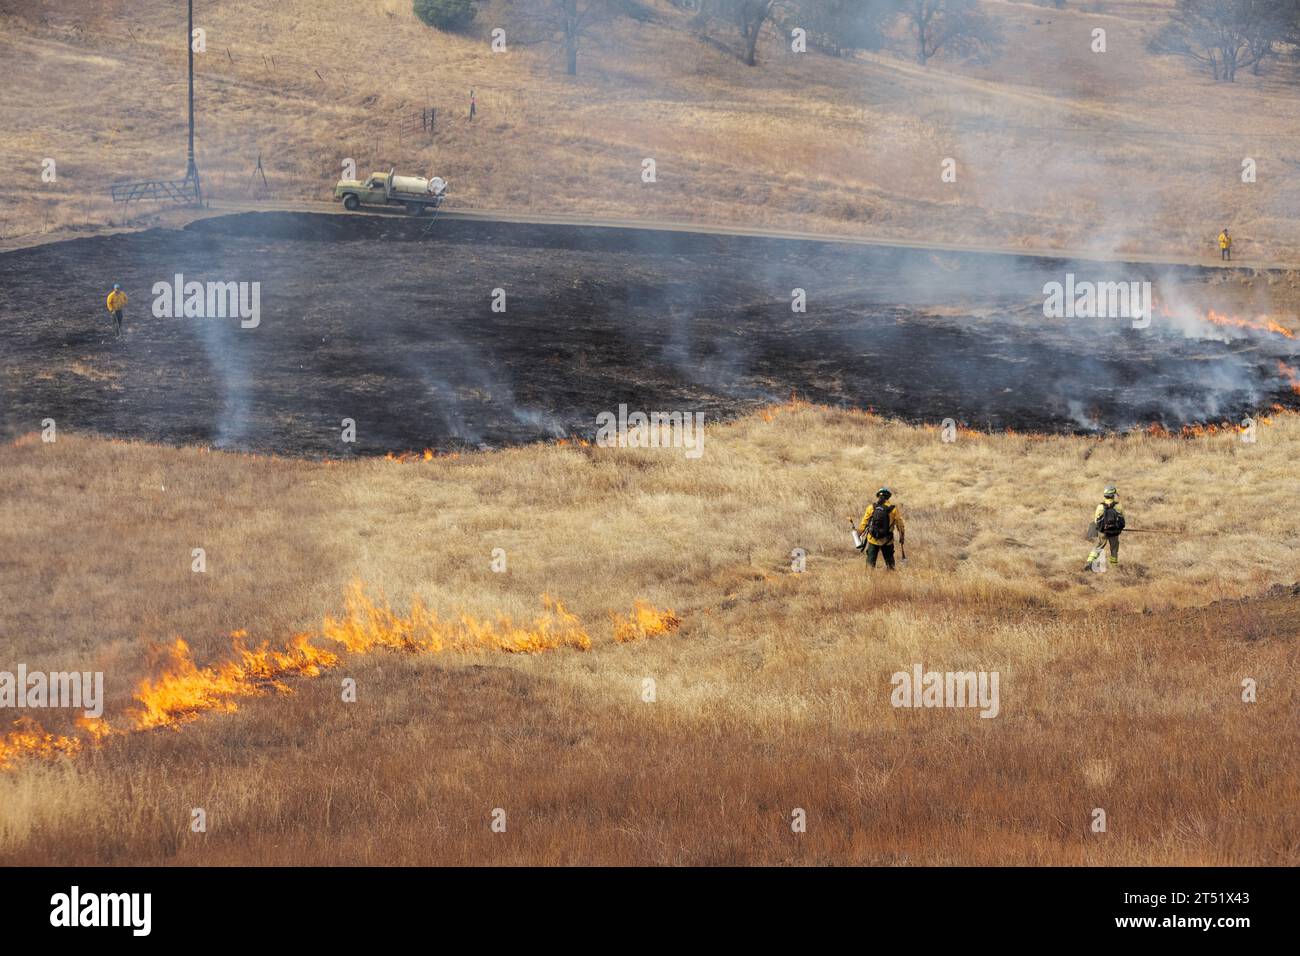 Firefighters light a line of fire in grasses during a control burn Stock Photo